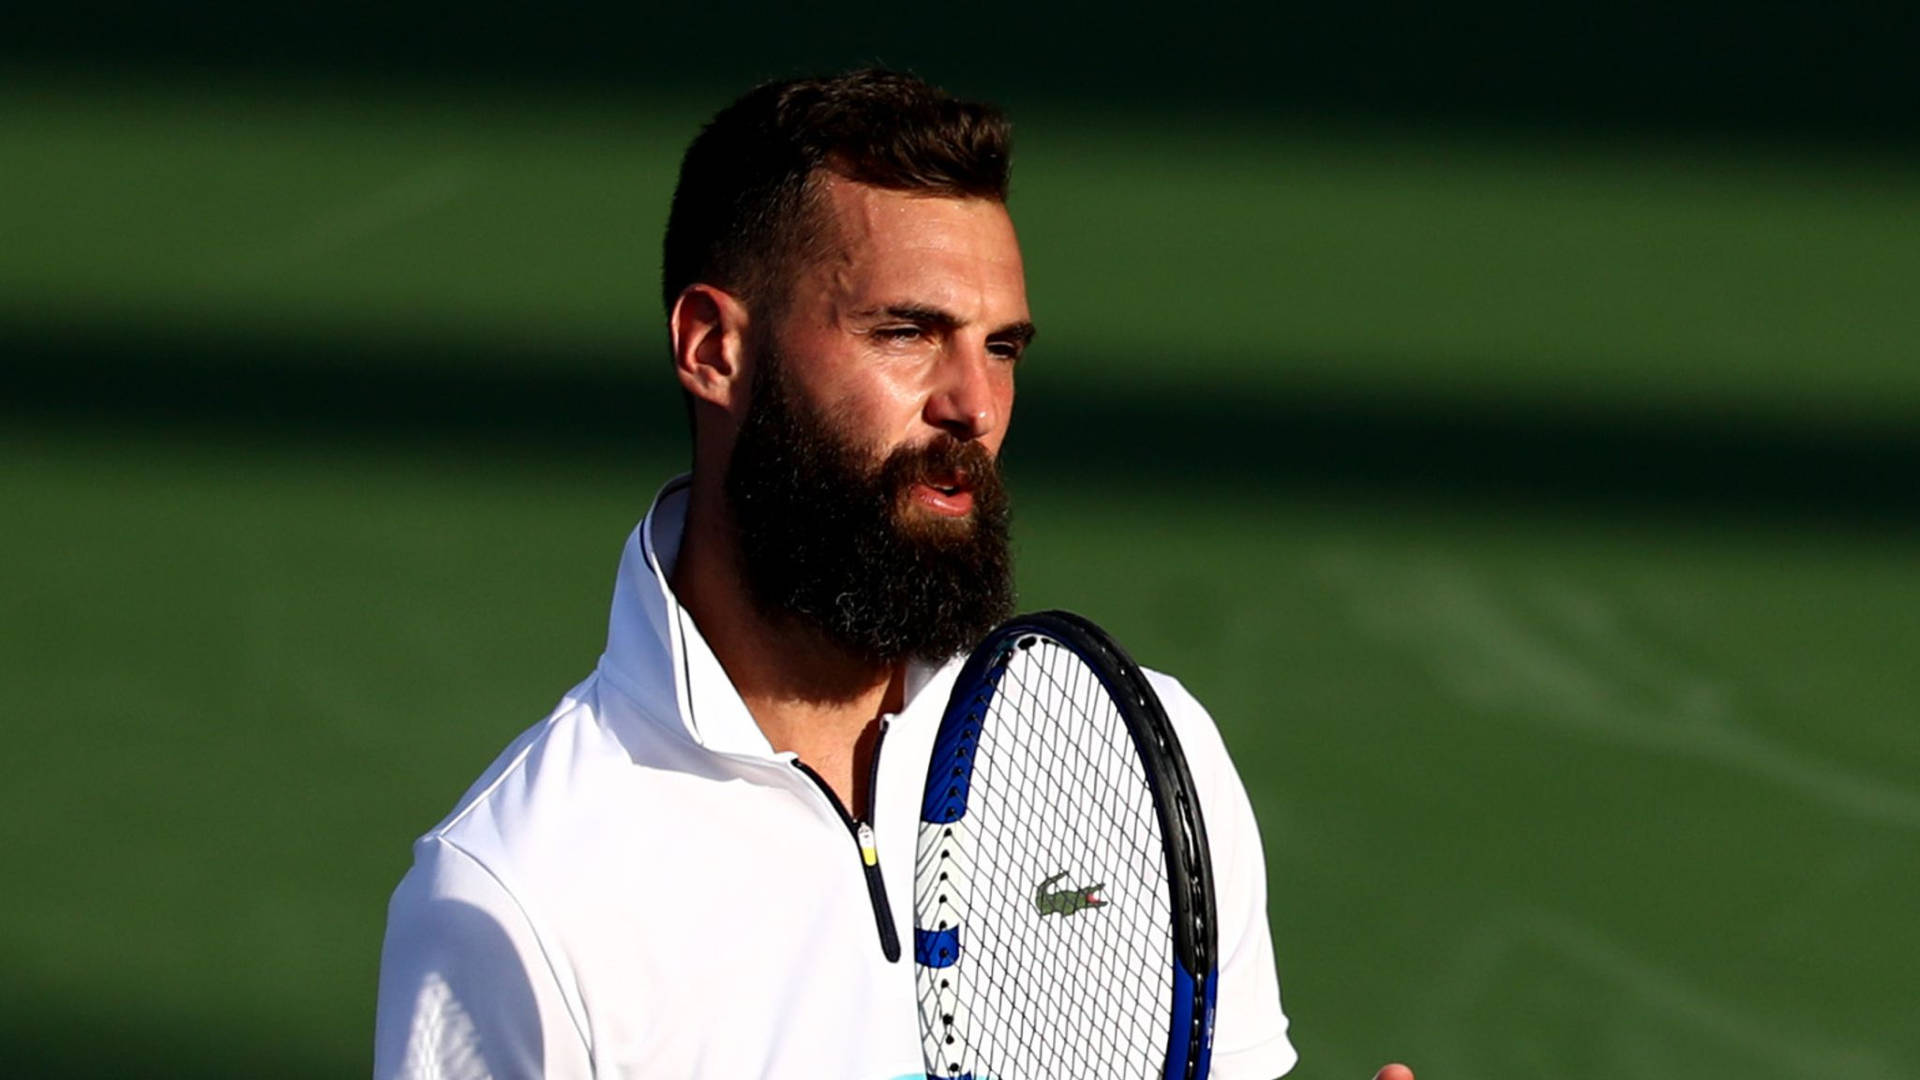 French tennis star Benoit Paire in action on tennis court. Wallpaper